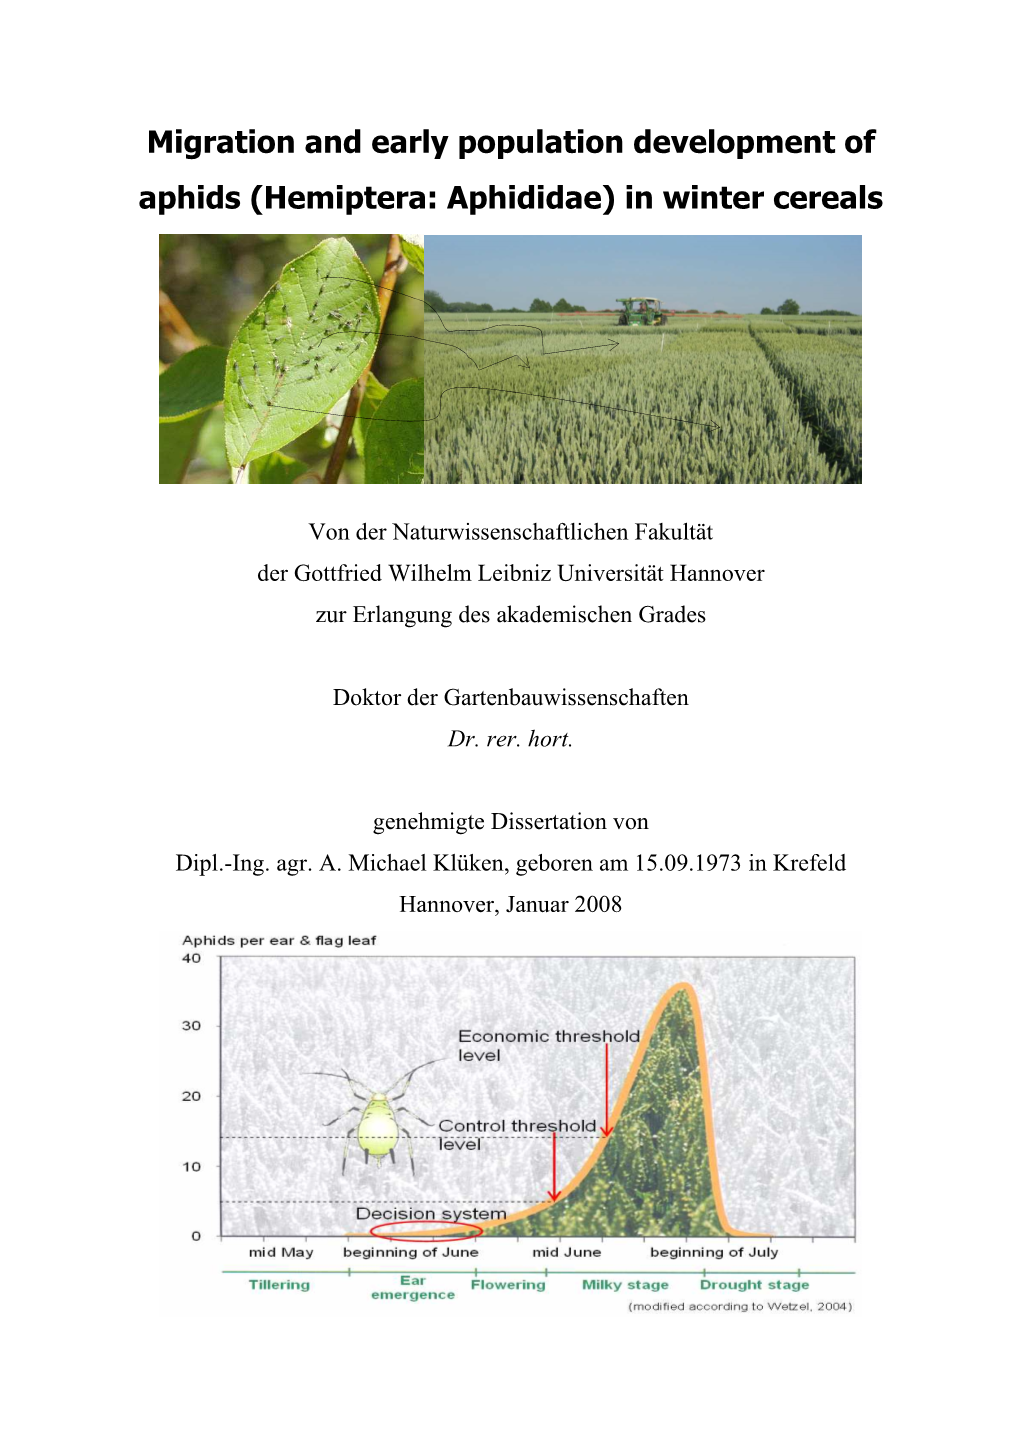 Migration and Early Population Development of Aphids (Hemiptera: Aphididae) in Winter Cereals